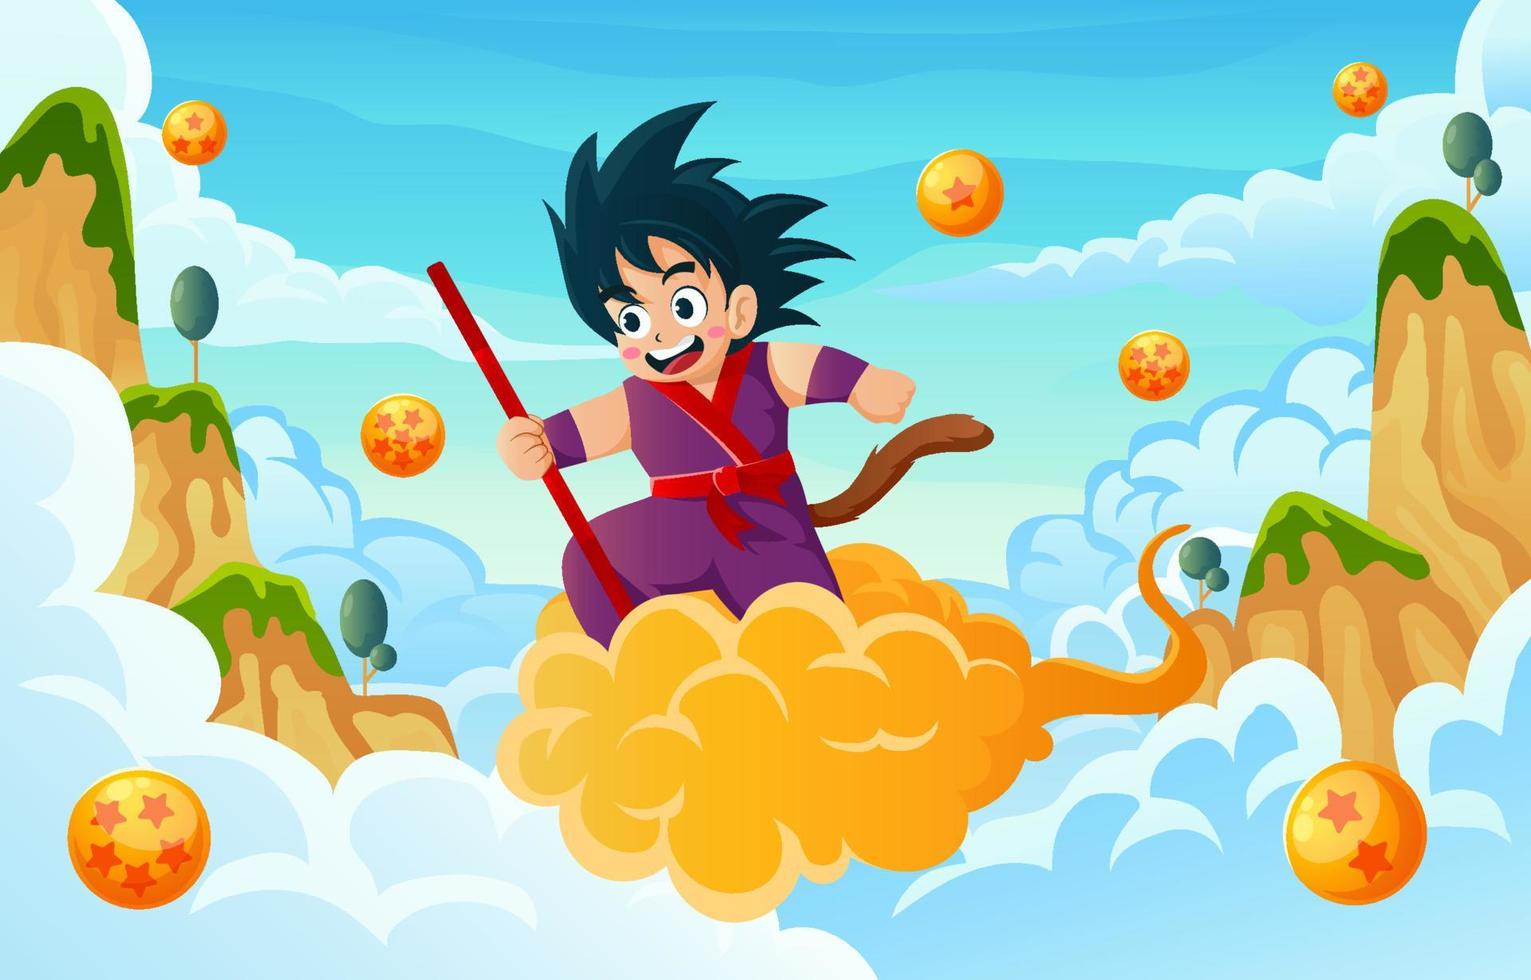 Kid Riding a Flying Cloud with Landscape Scene Concept vector